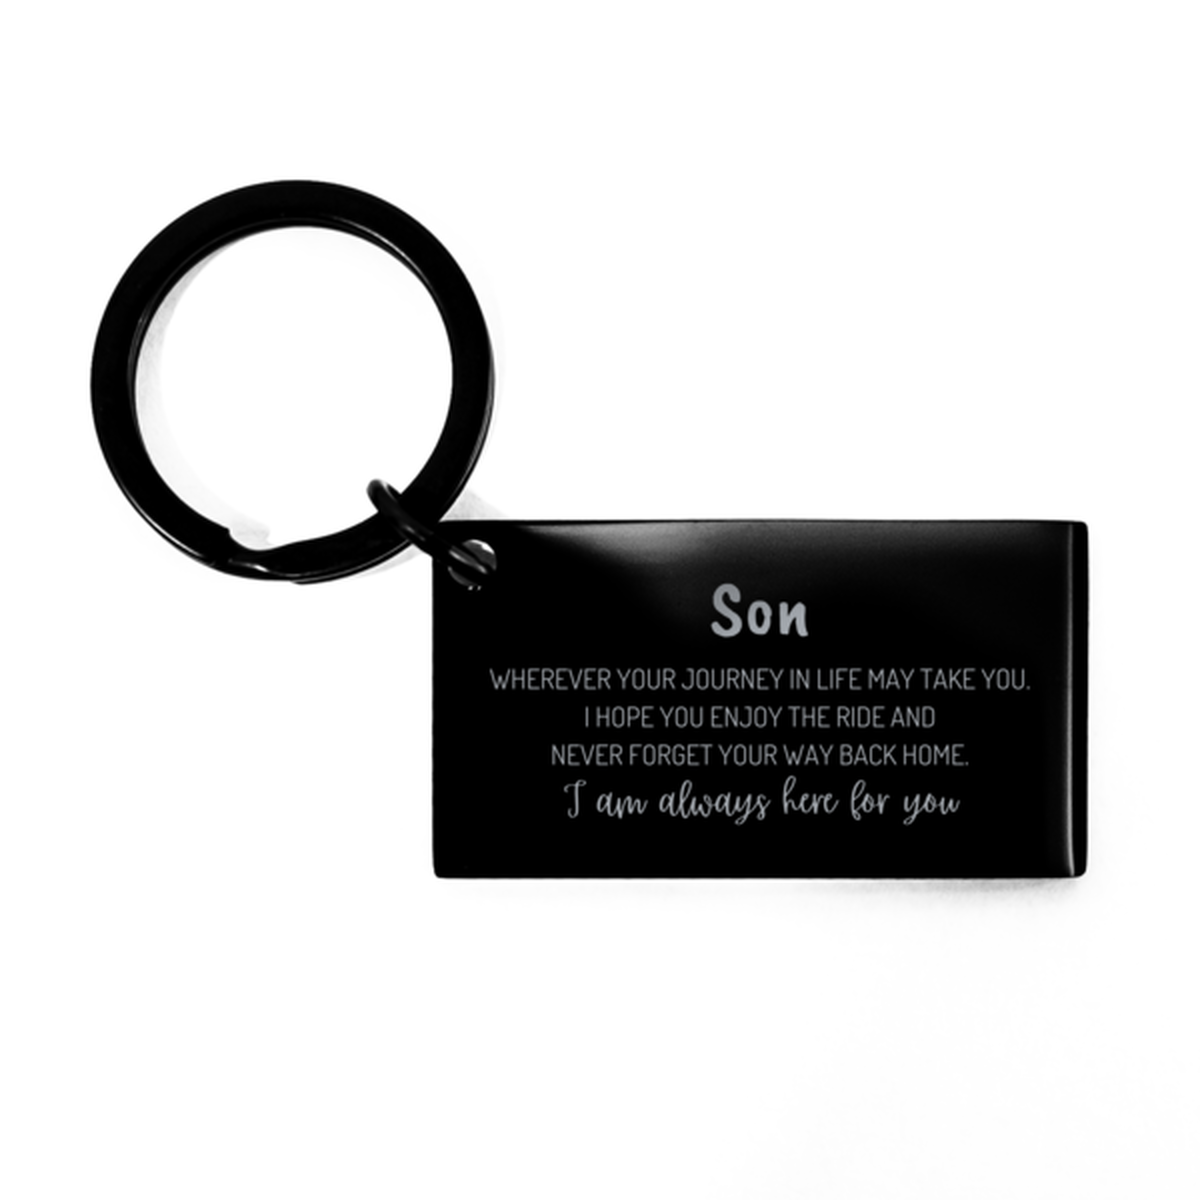 Son wherever your journey in life may take you, I am always here for you Son Keychain, Awesome Christmas Gifts For Son, Son Birthday Gifts for Men Women Family Loved One